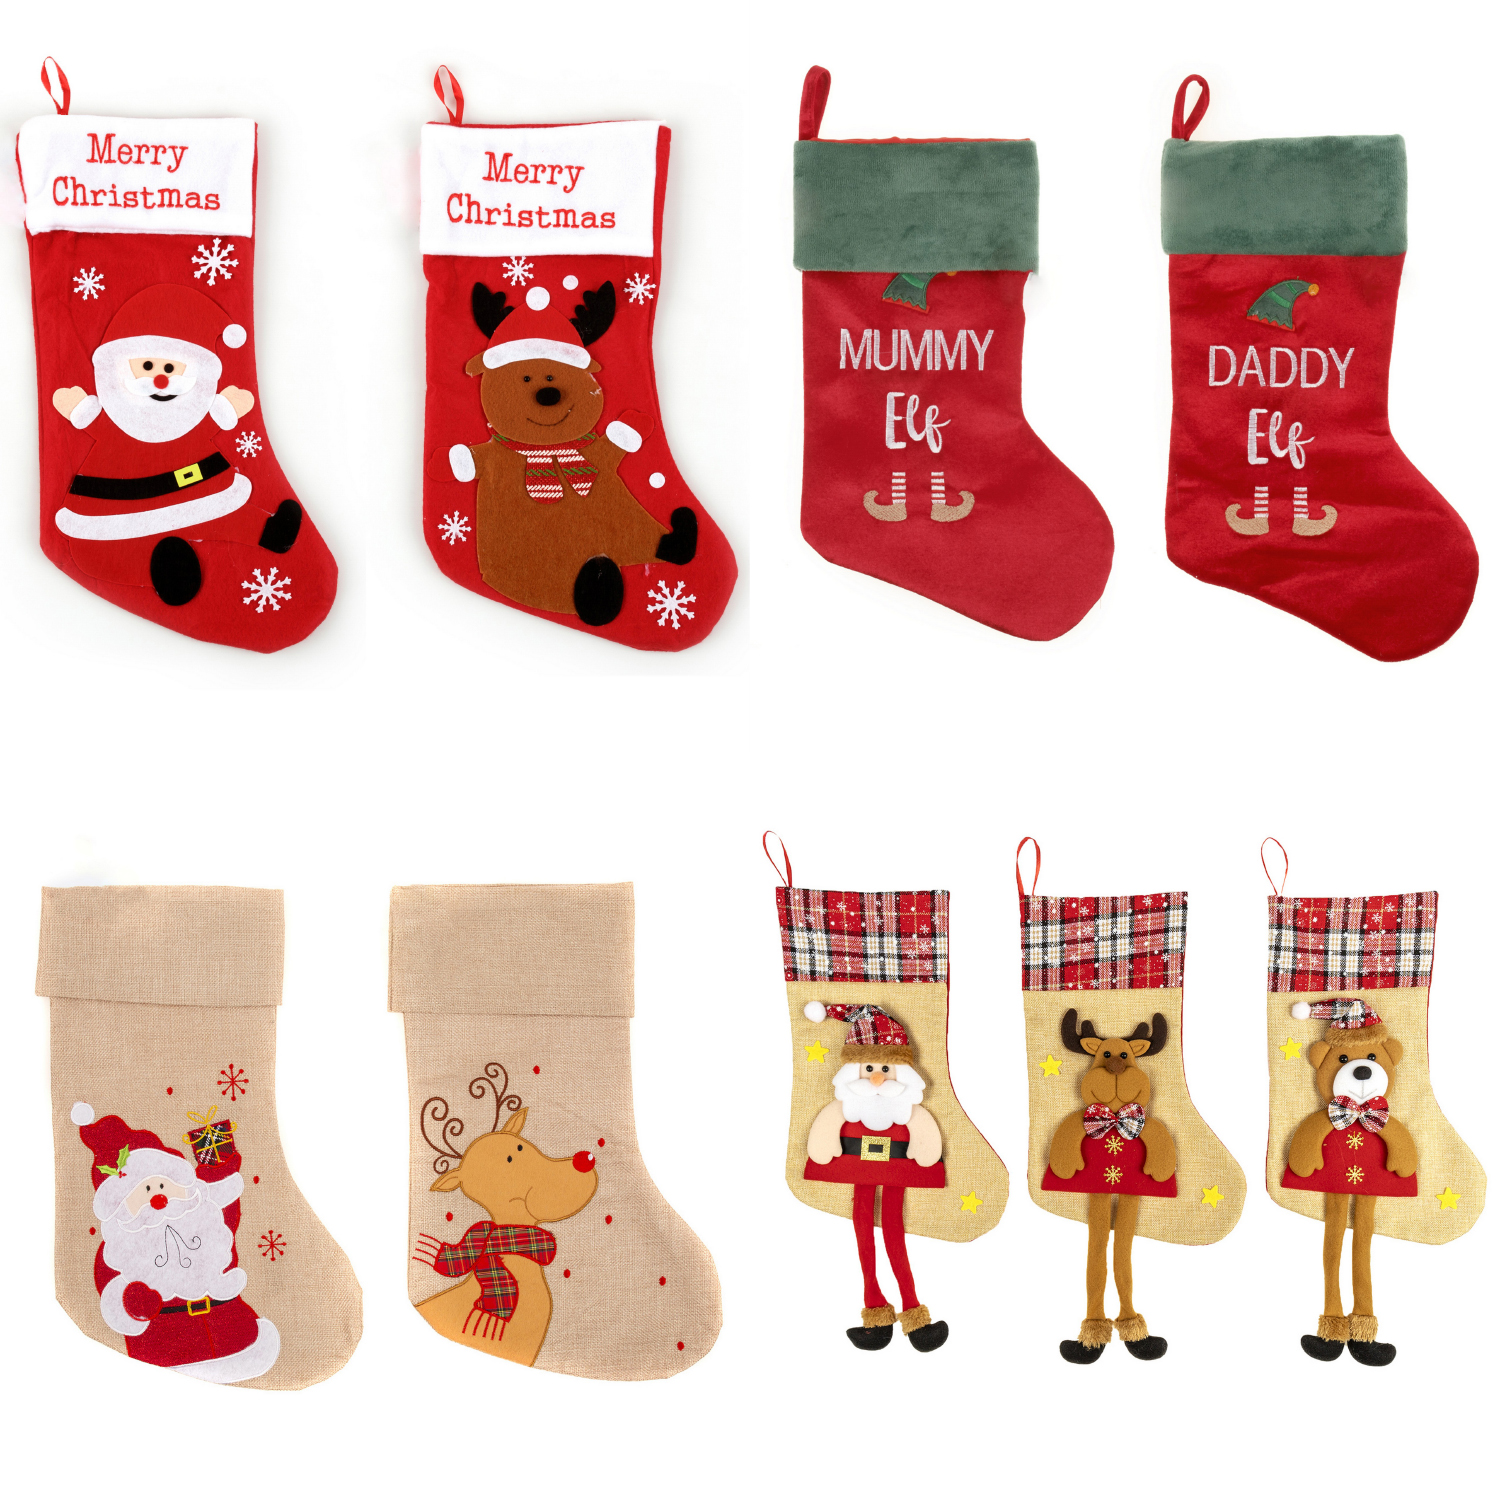 2-3x Large 42cm Christmas Stockings Socks Hanging Décor Ornaments Candy Gift Bag